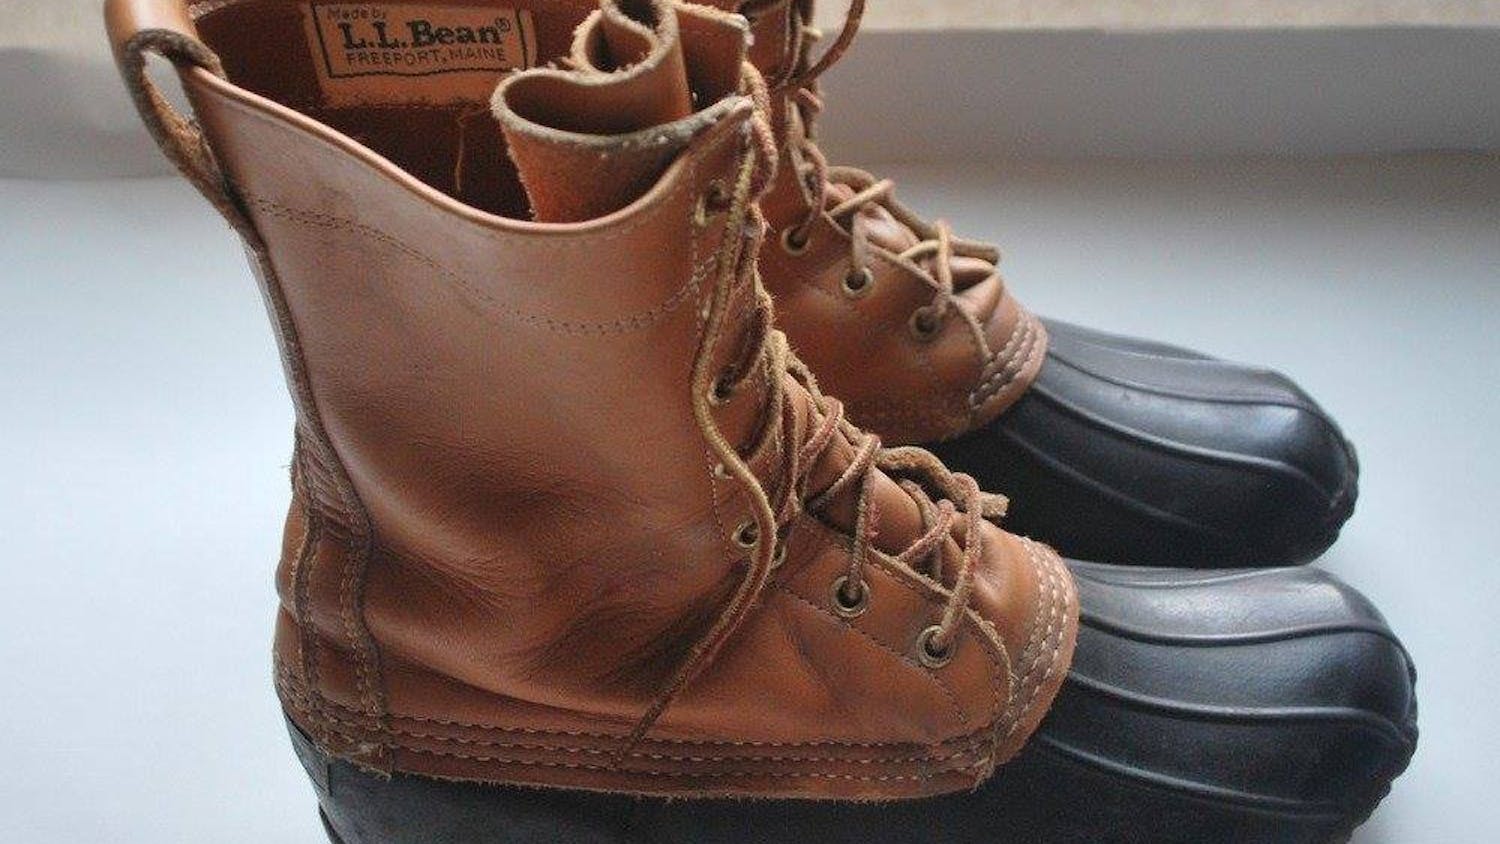 LL Bean boots are great for both men and women.&nbsp;